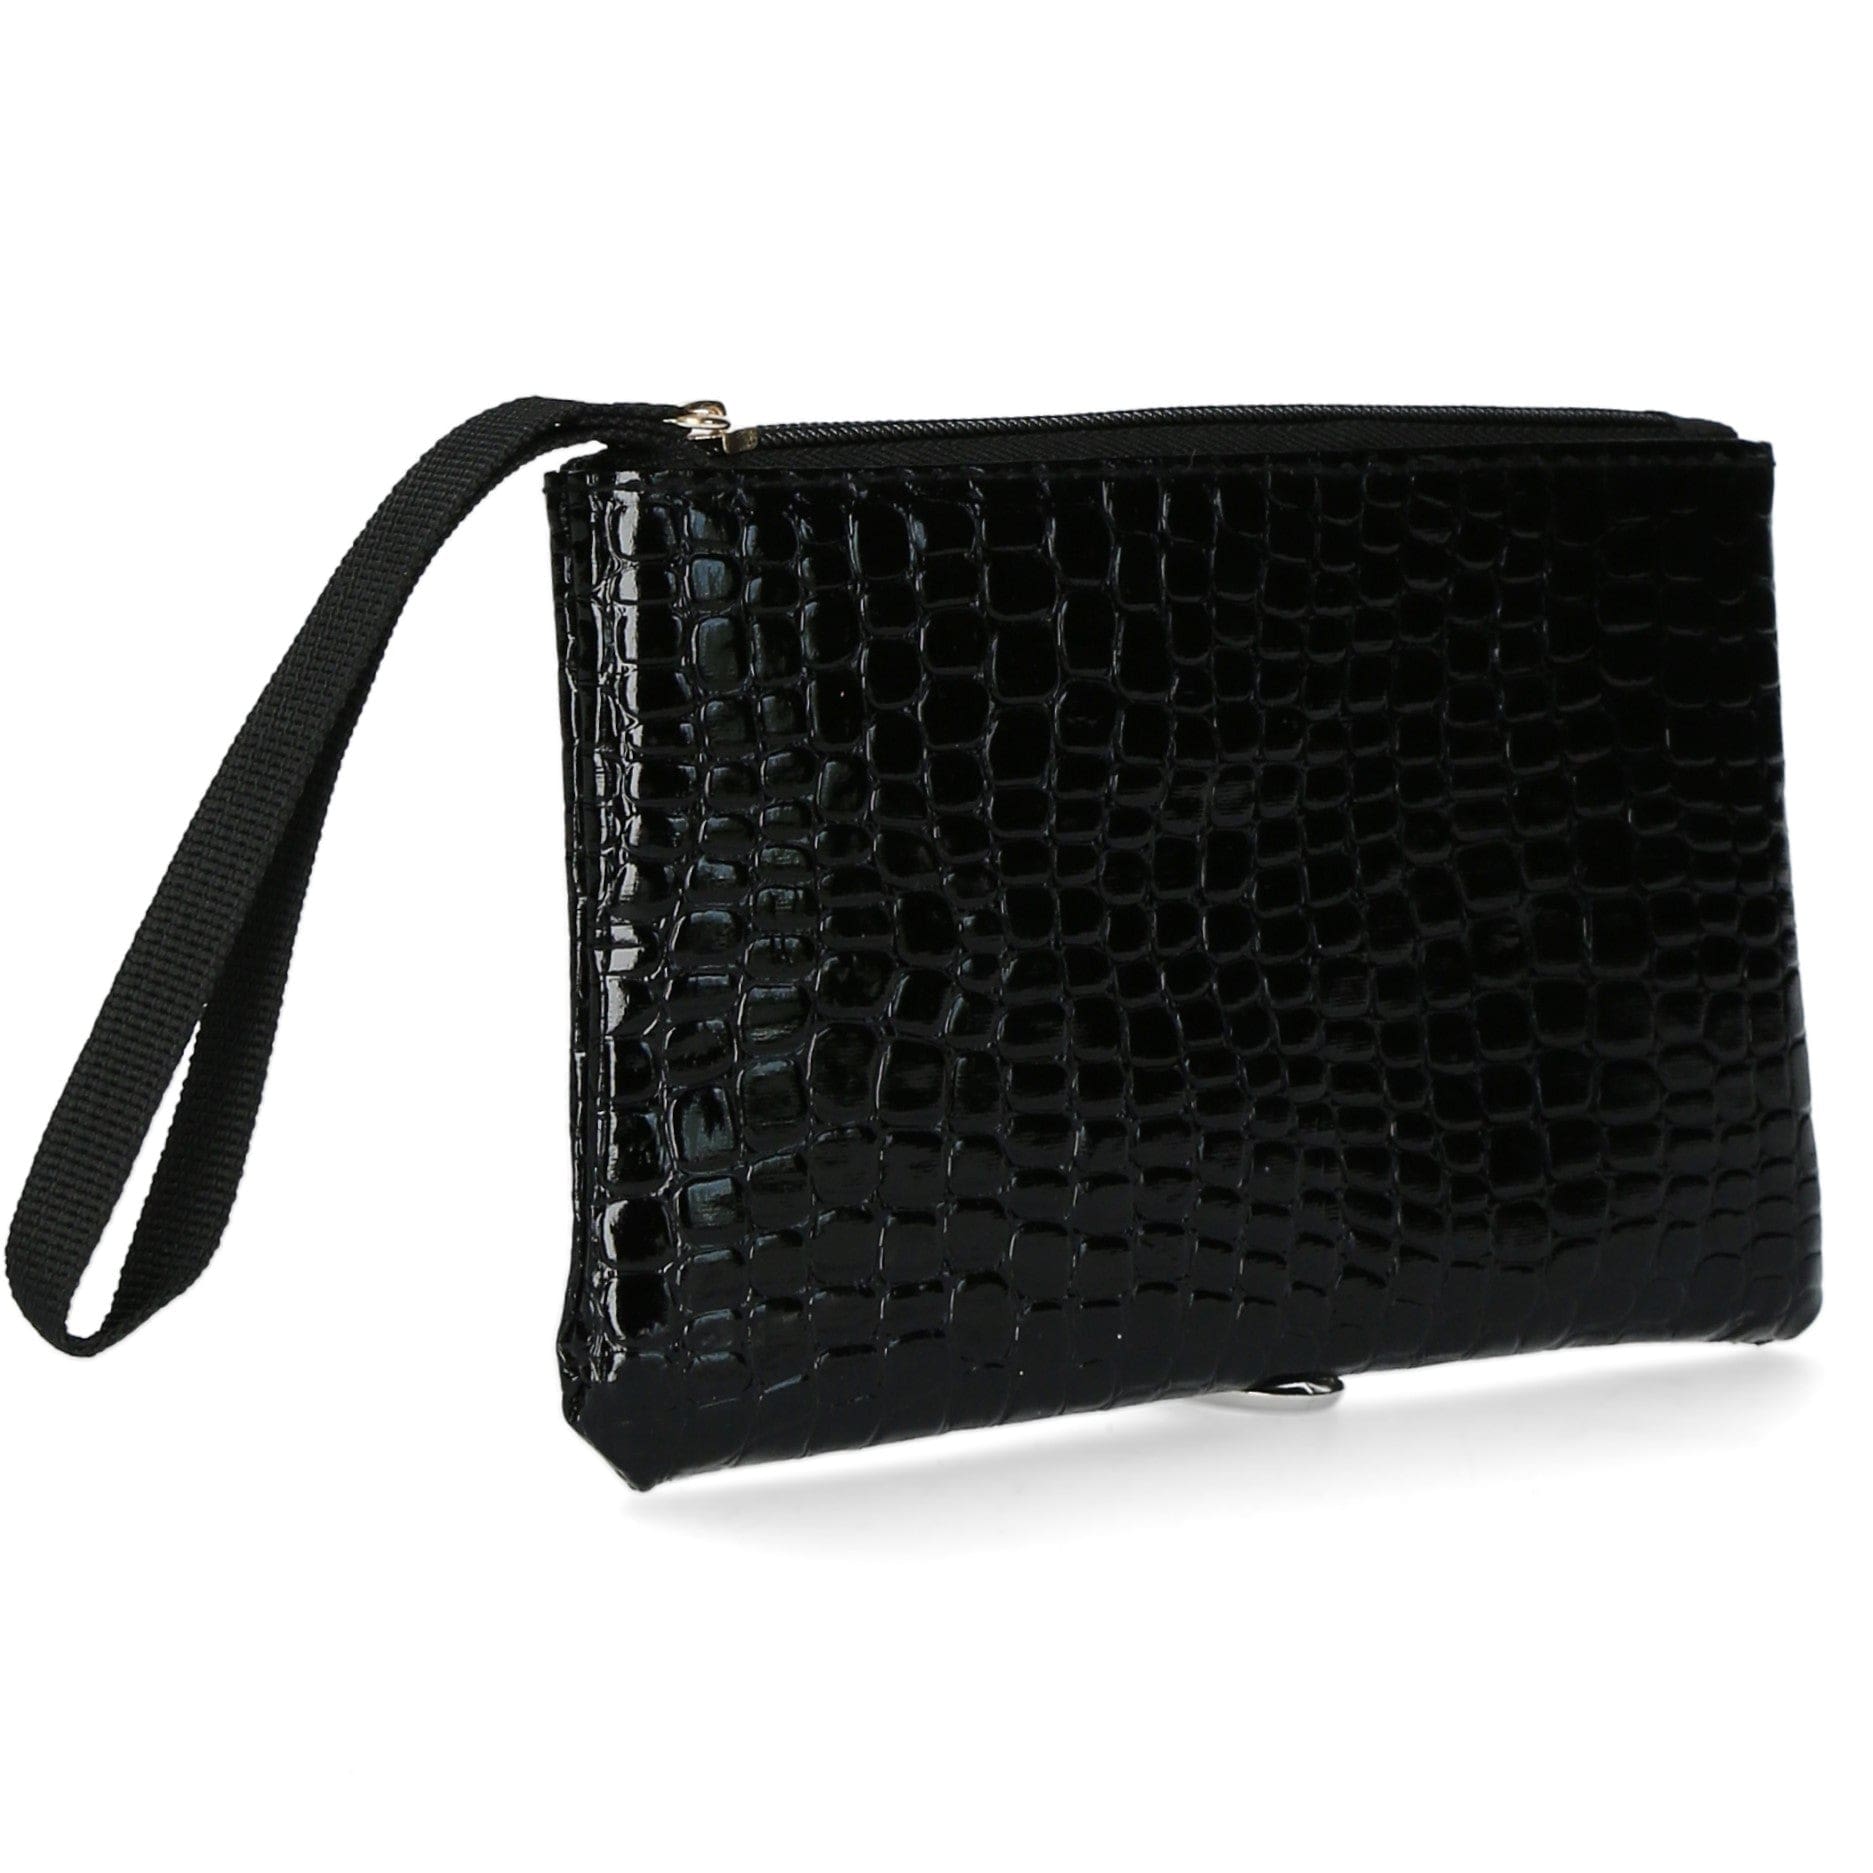 Bloch clutch bag - Small leather goods